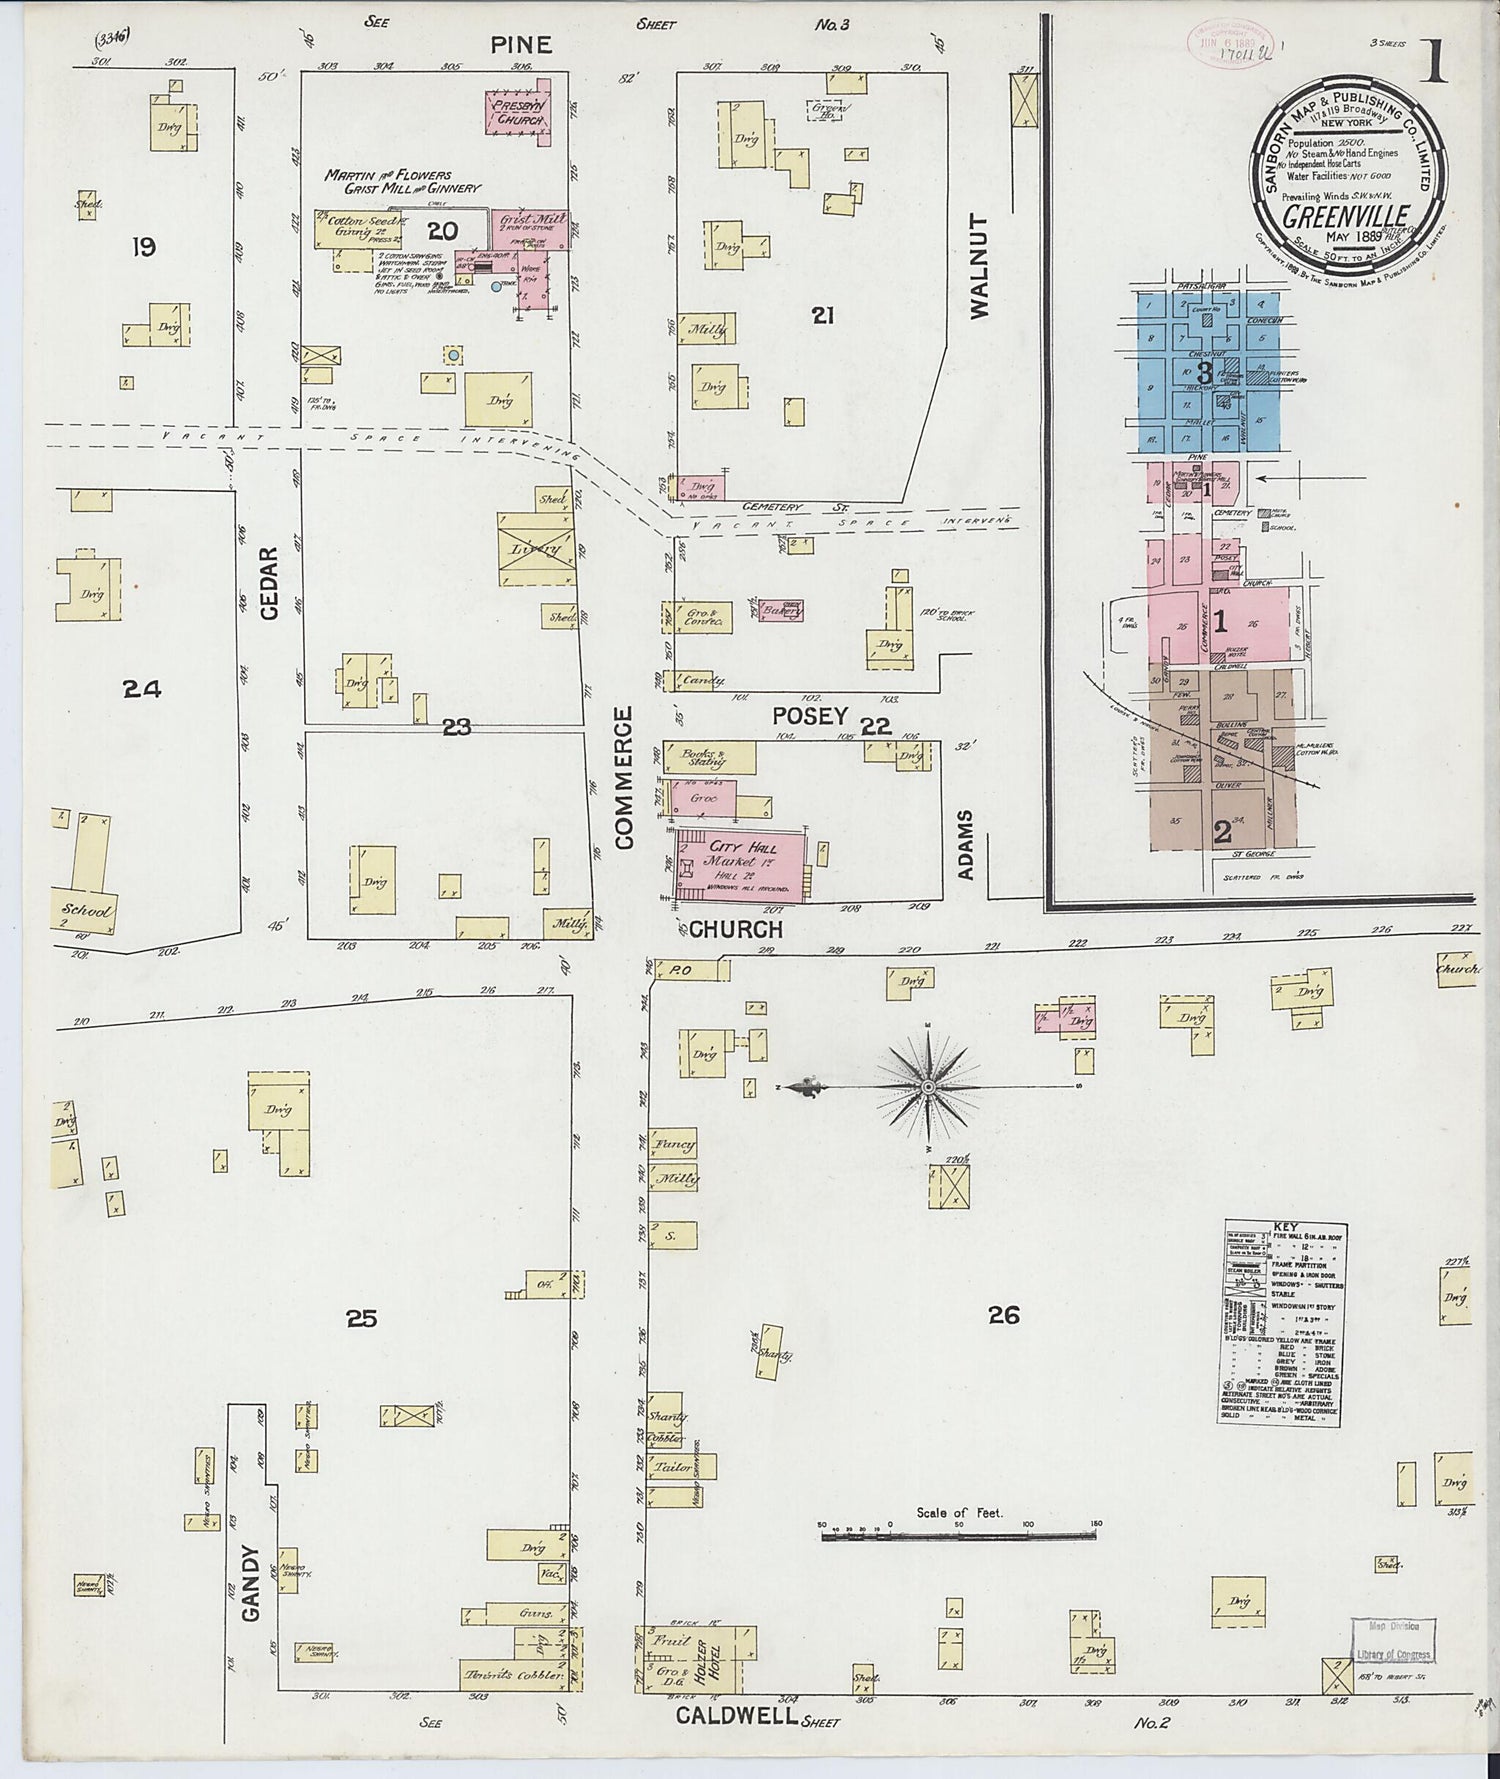 This old map of Greenville, Butler County, Alabama was created by Sanborn Map Company in 1889